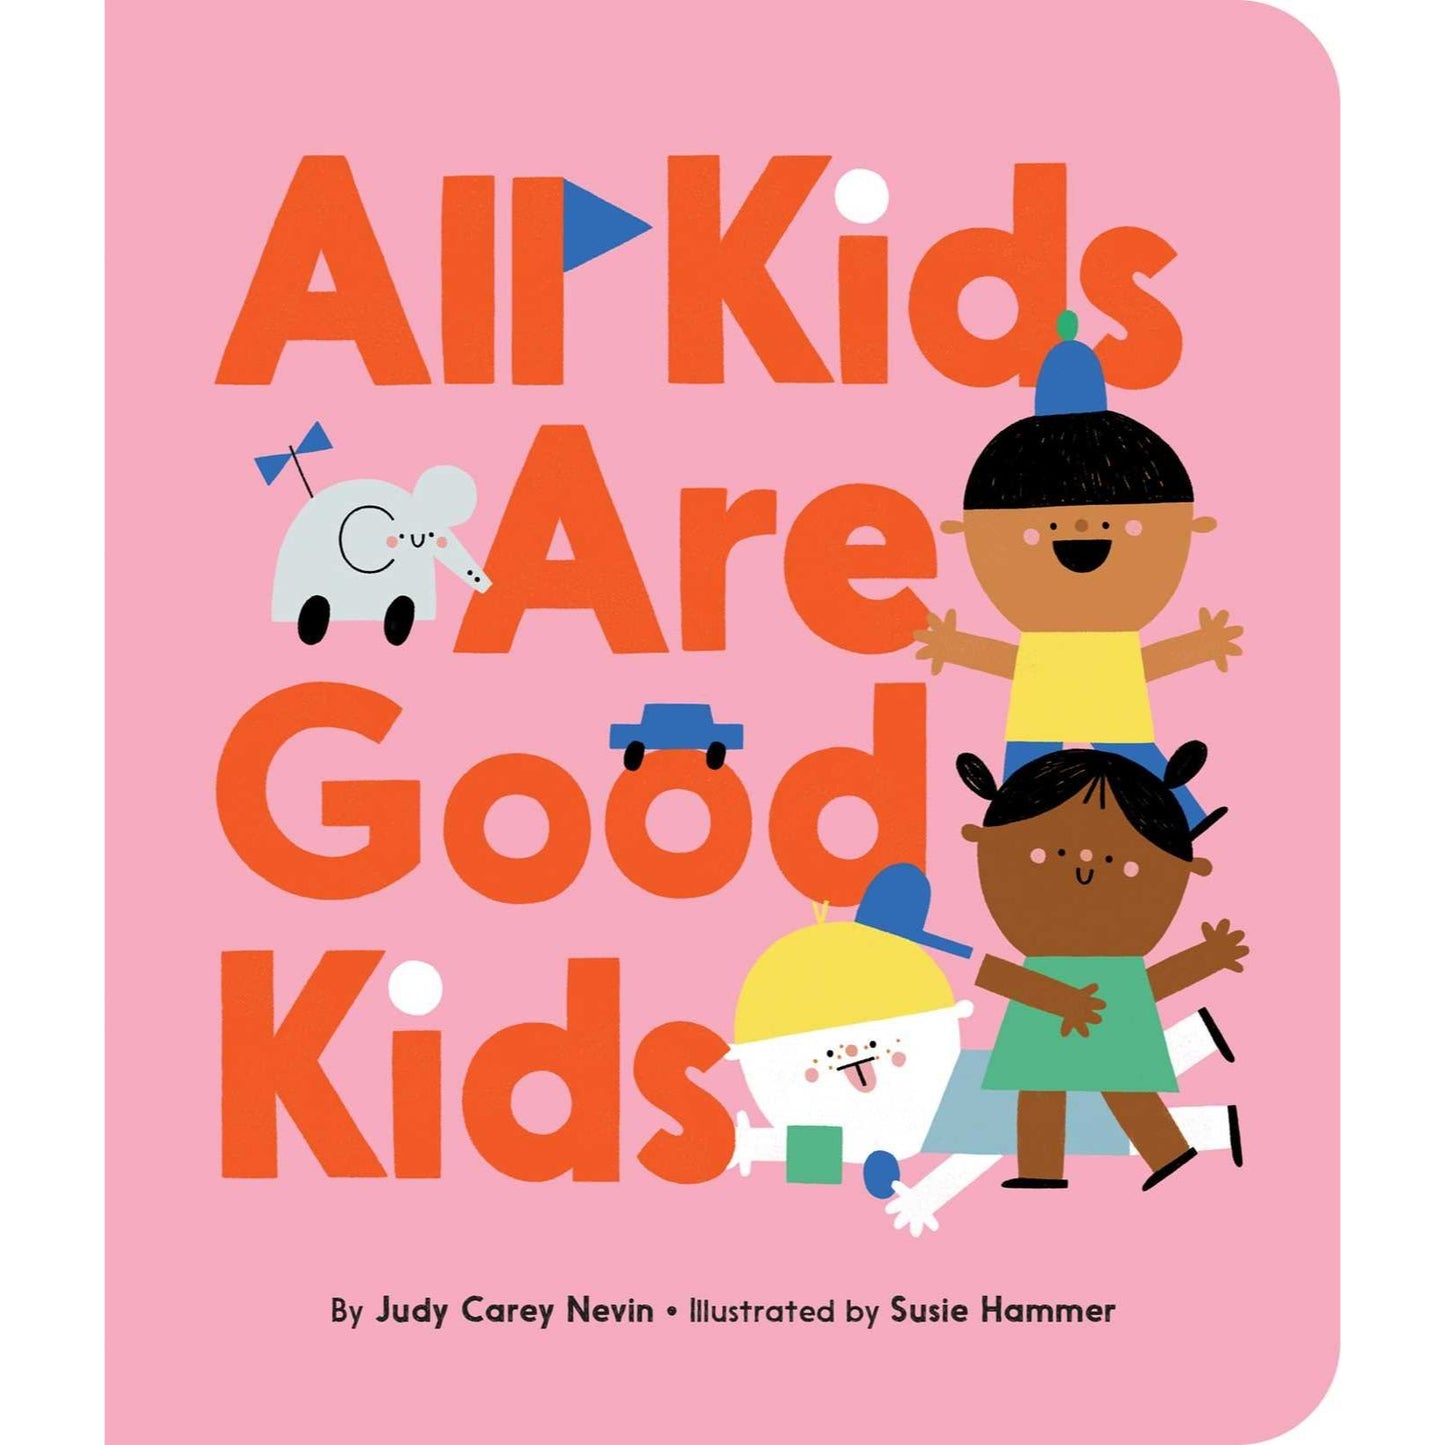 All kids are good kids